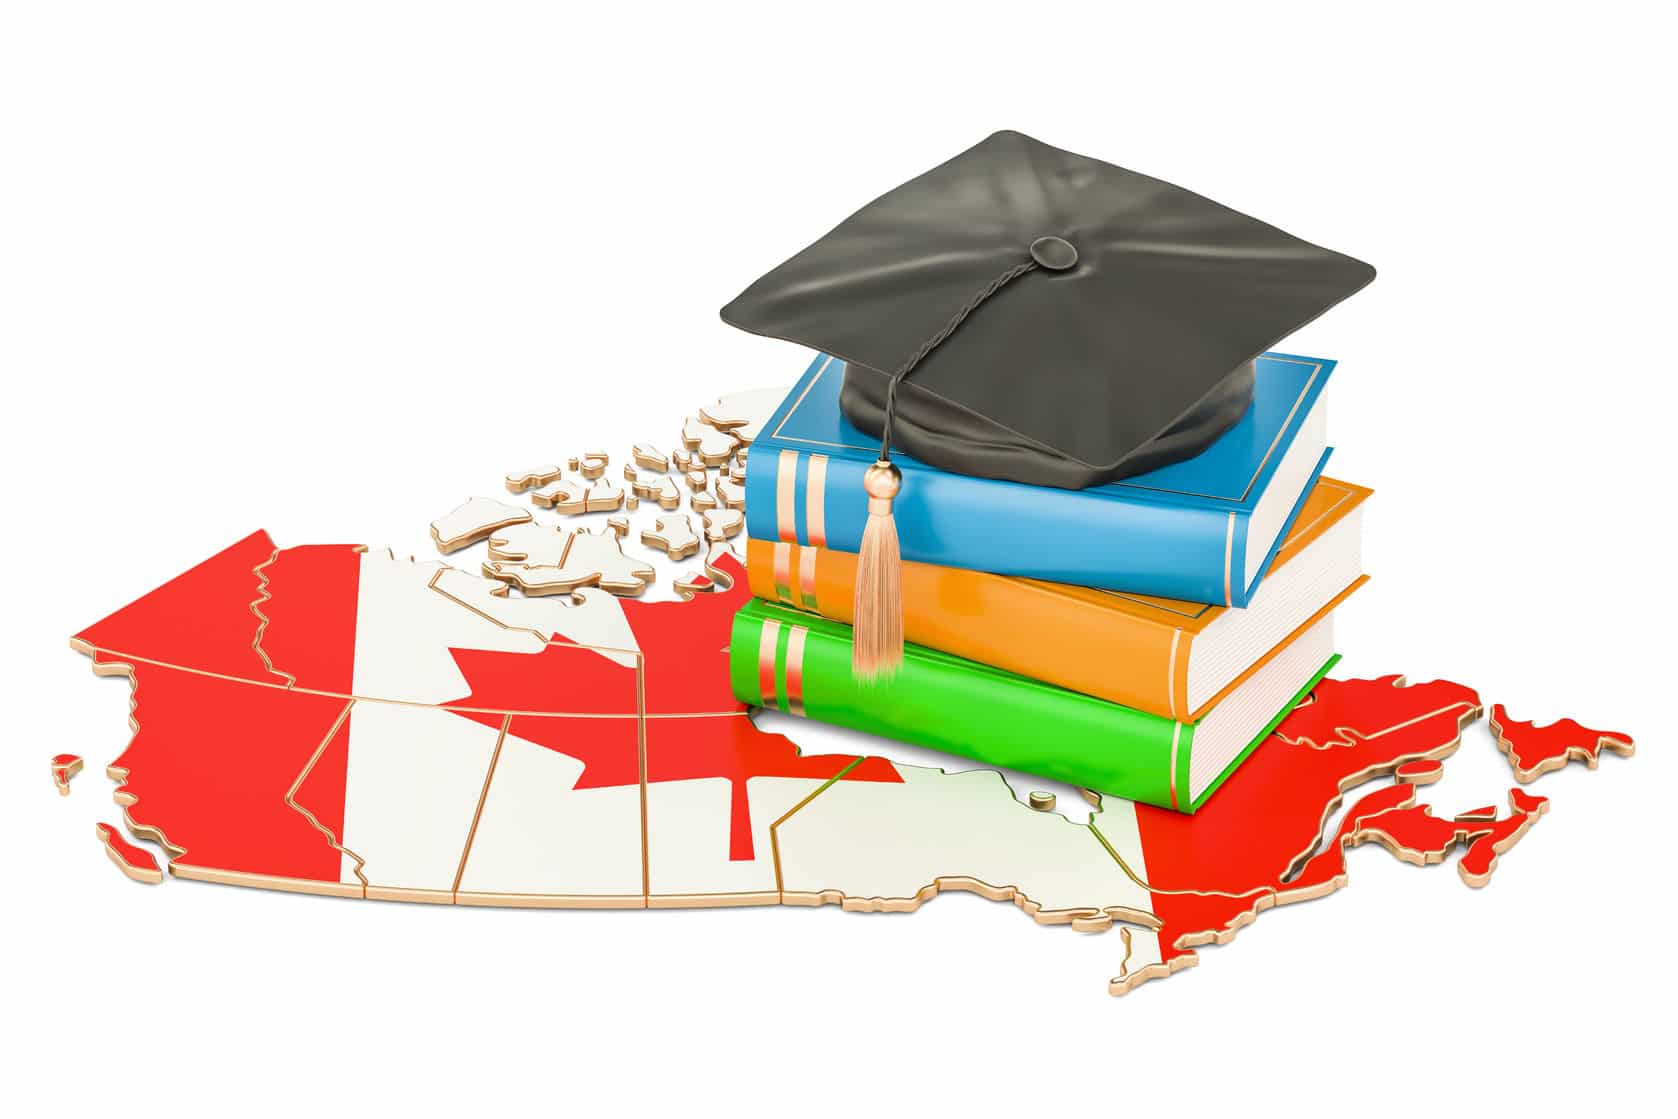 Graduation cap on a stack of books beside a map of Canada, symbolizing education and the Canada Study Permit process.